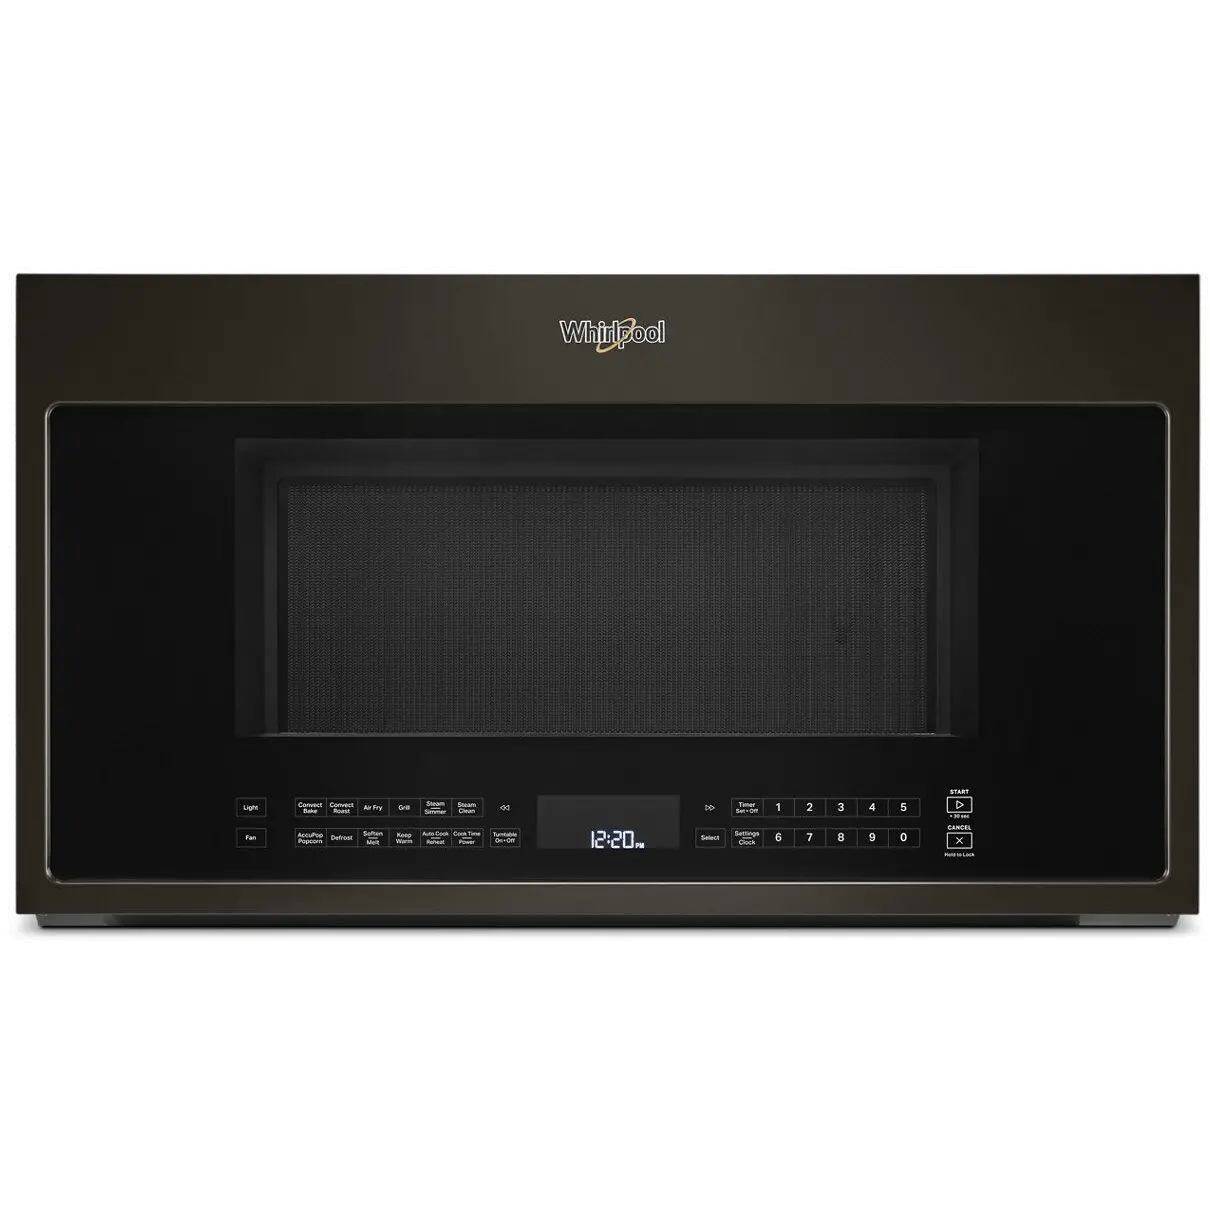 WMH78519LV Whirlpool 1.9 cu ft Over the Range Microwave - Black Stainless Steel-1